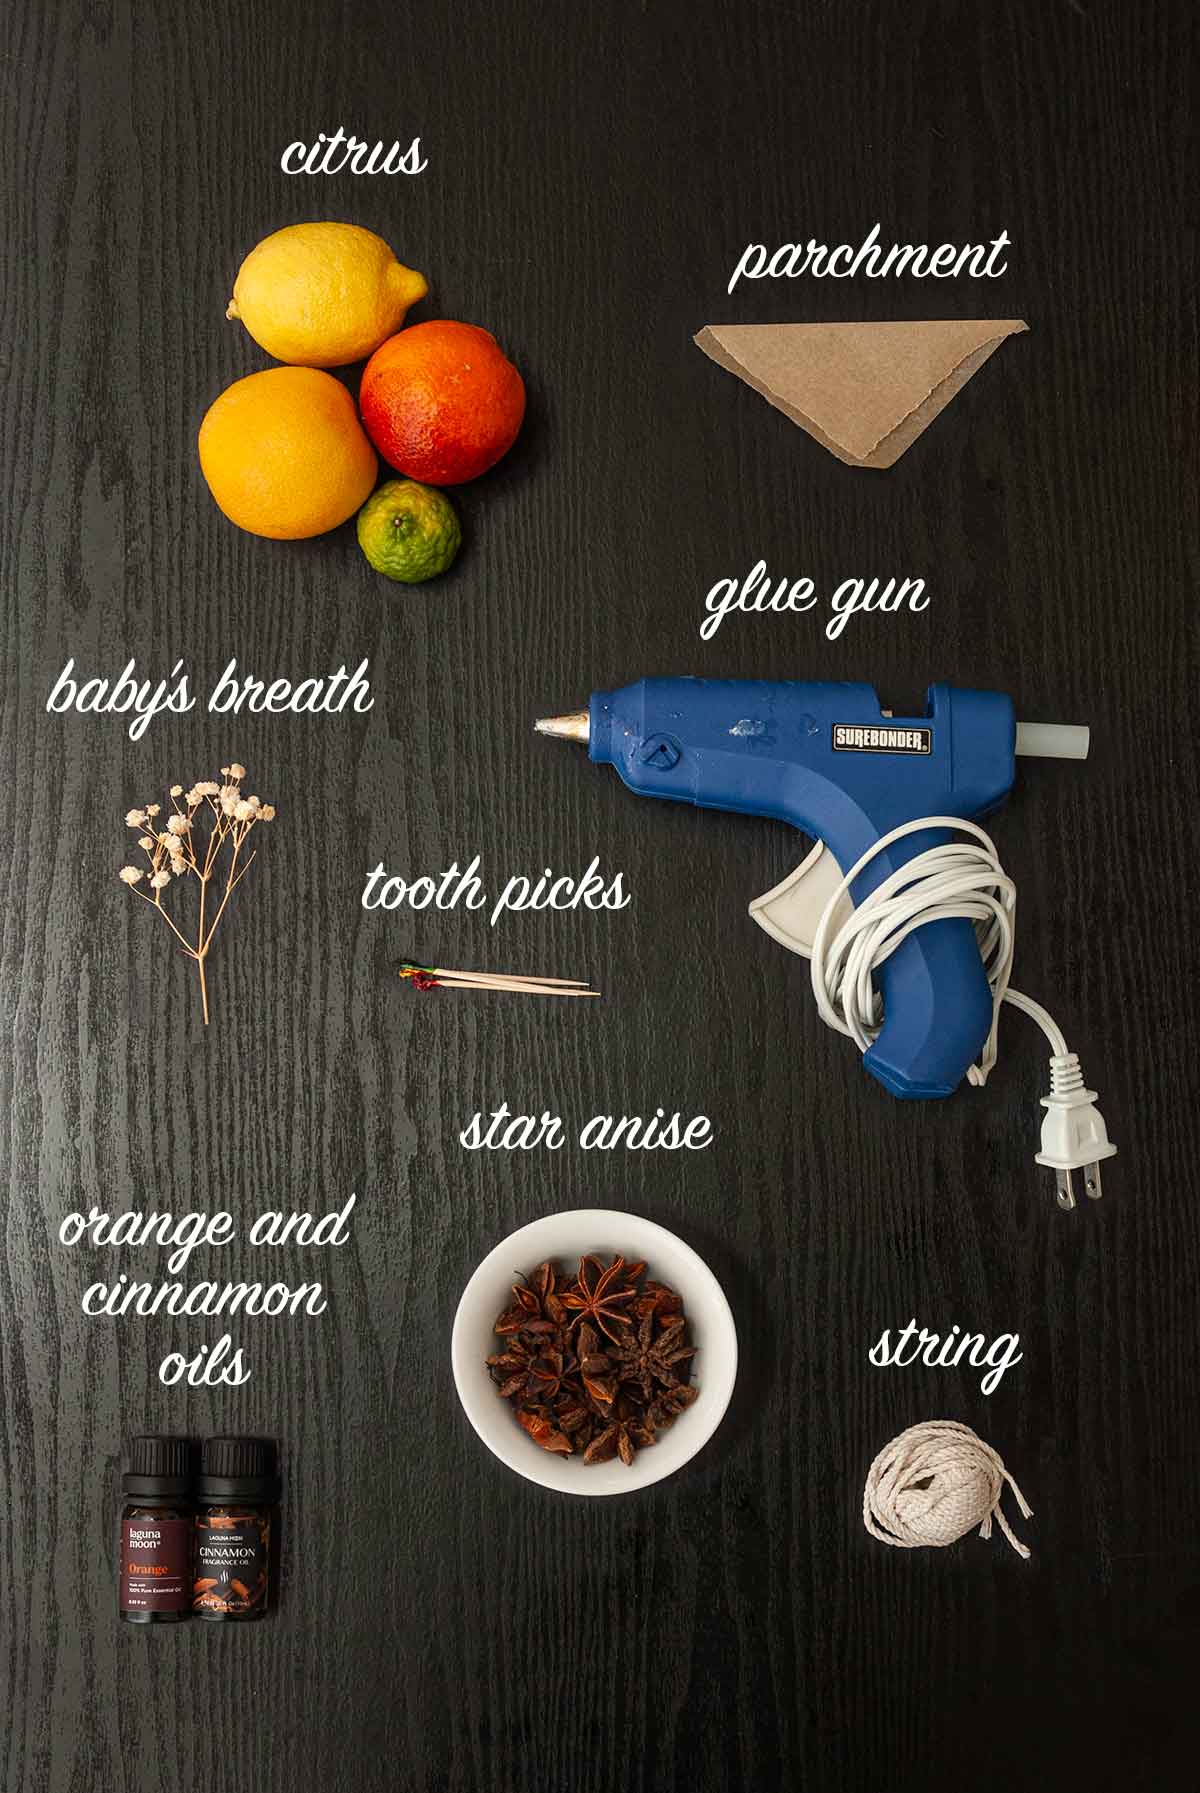 8 objects on a table needed to make citrus ornaments.